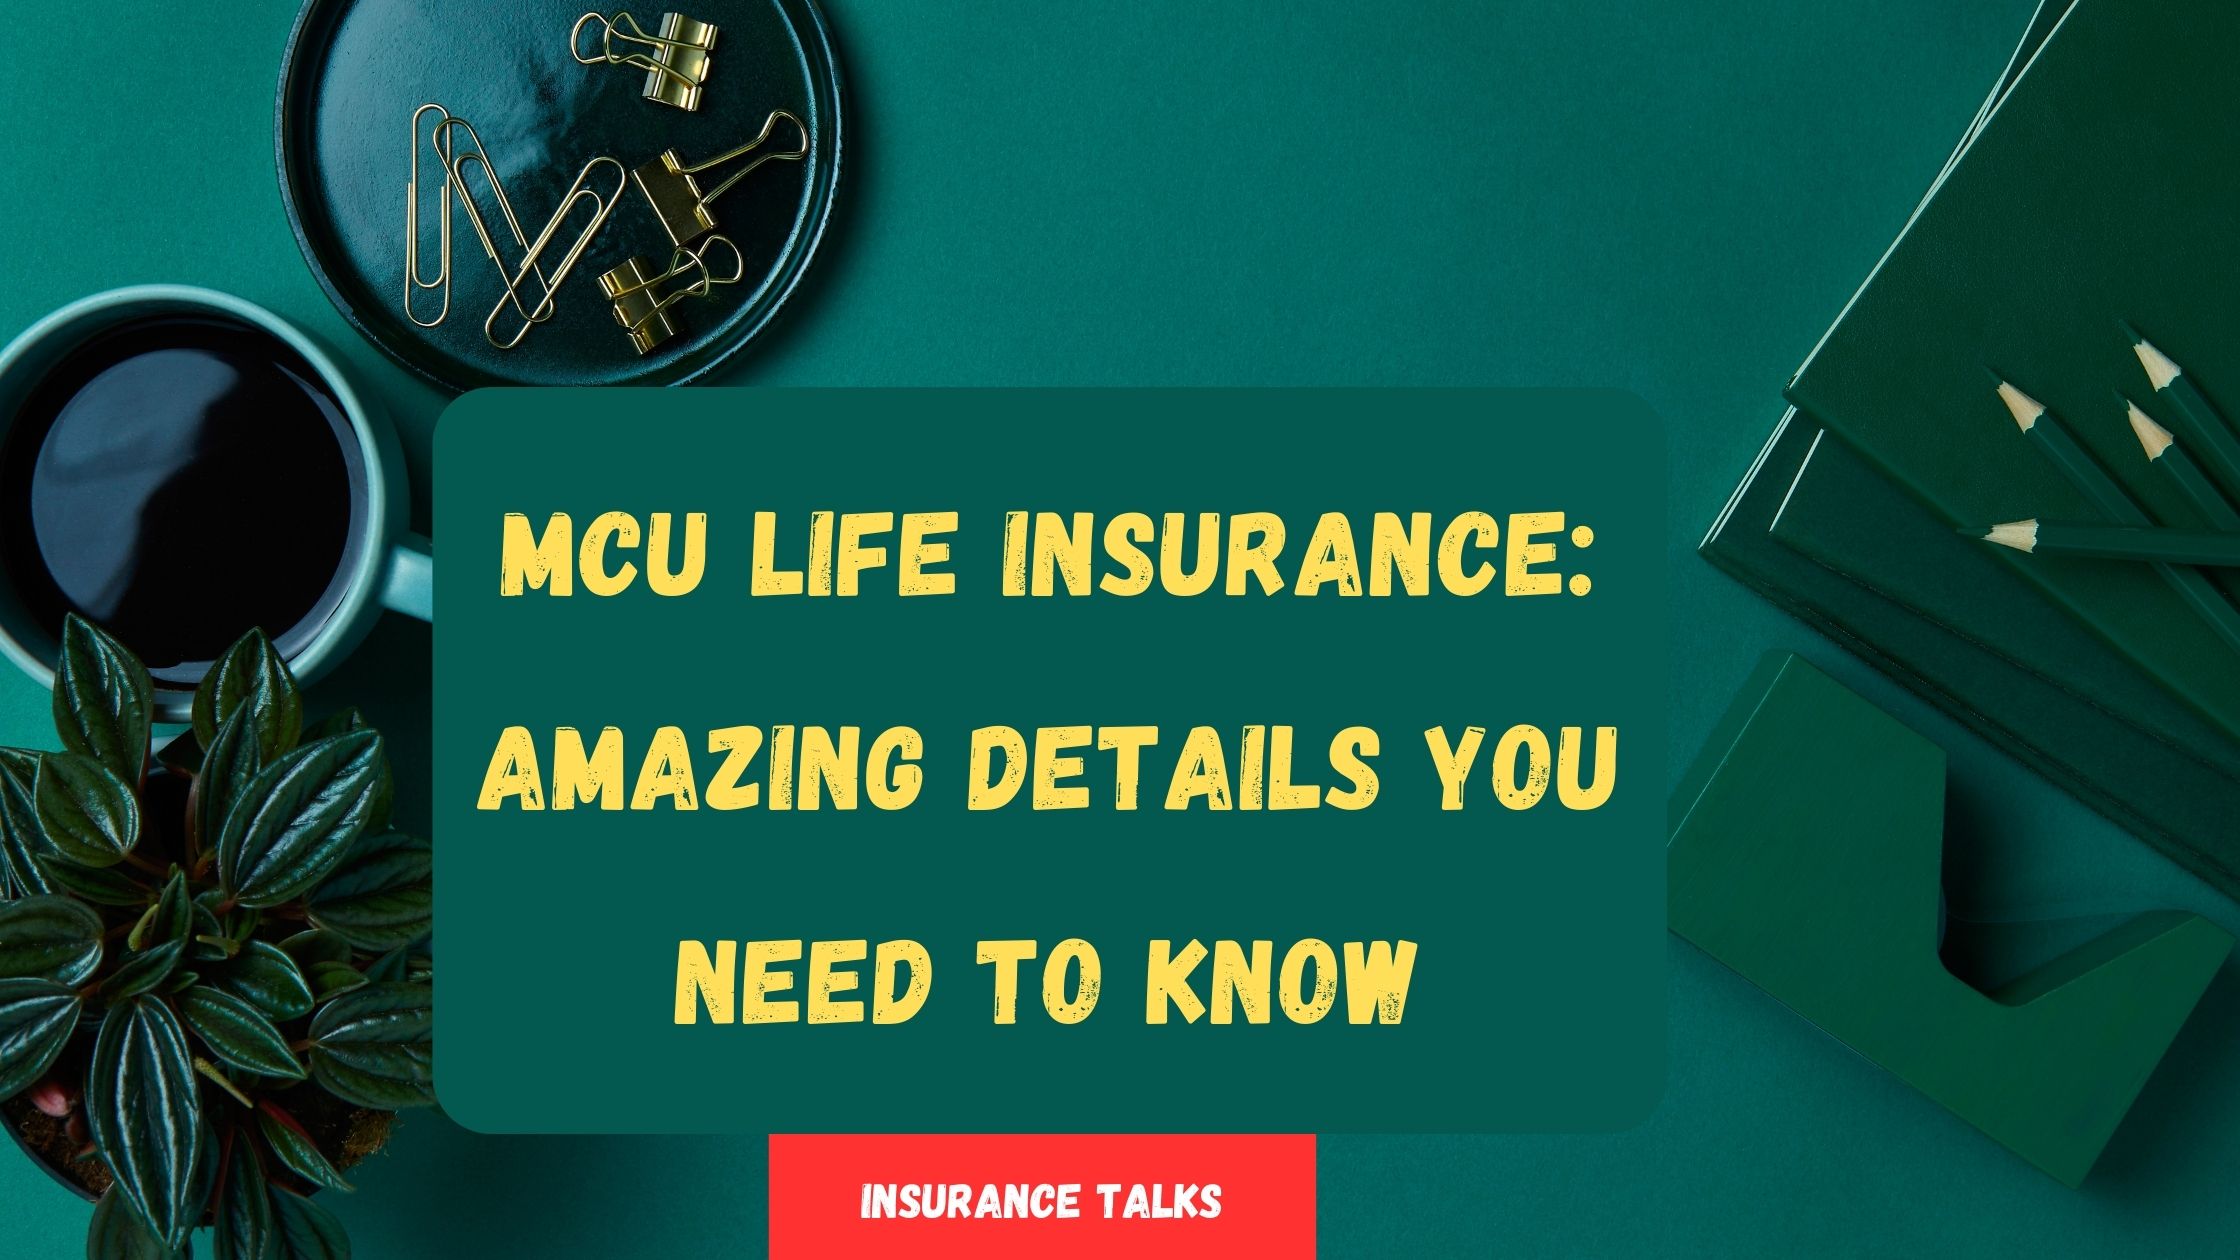 MCU life insurance: Amazing details you need to know